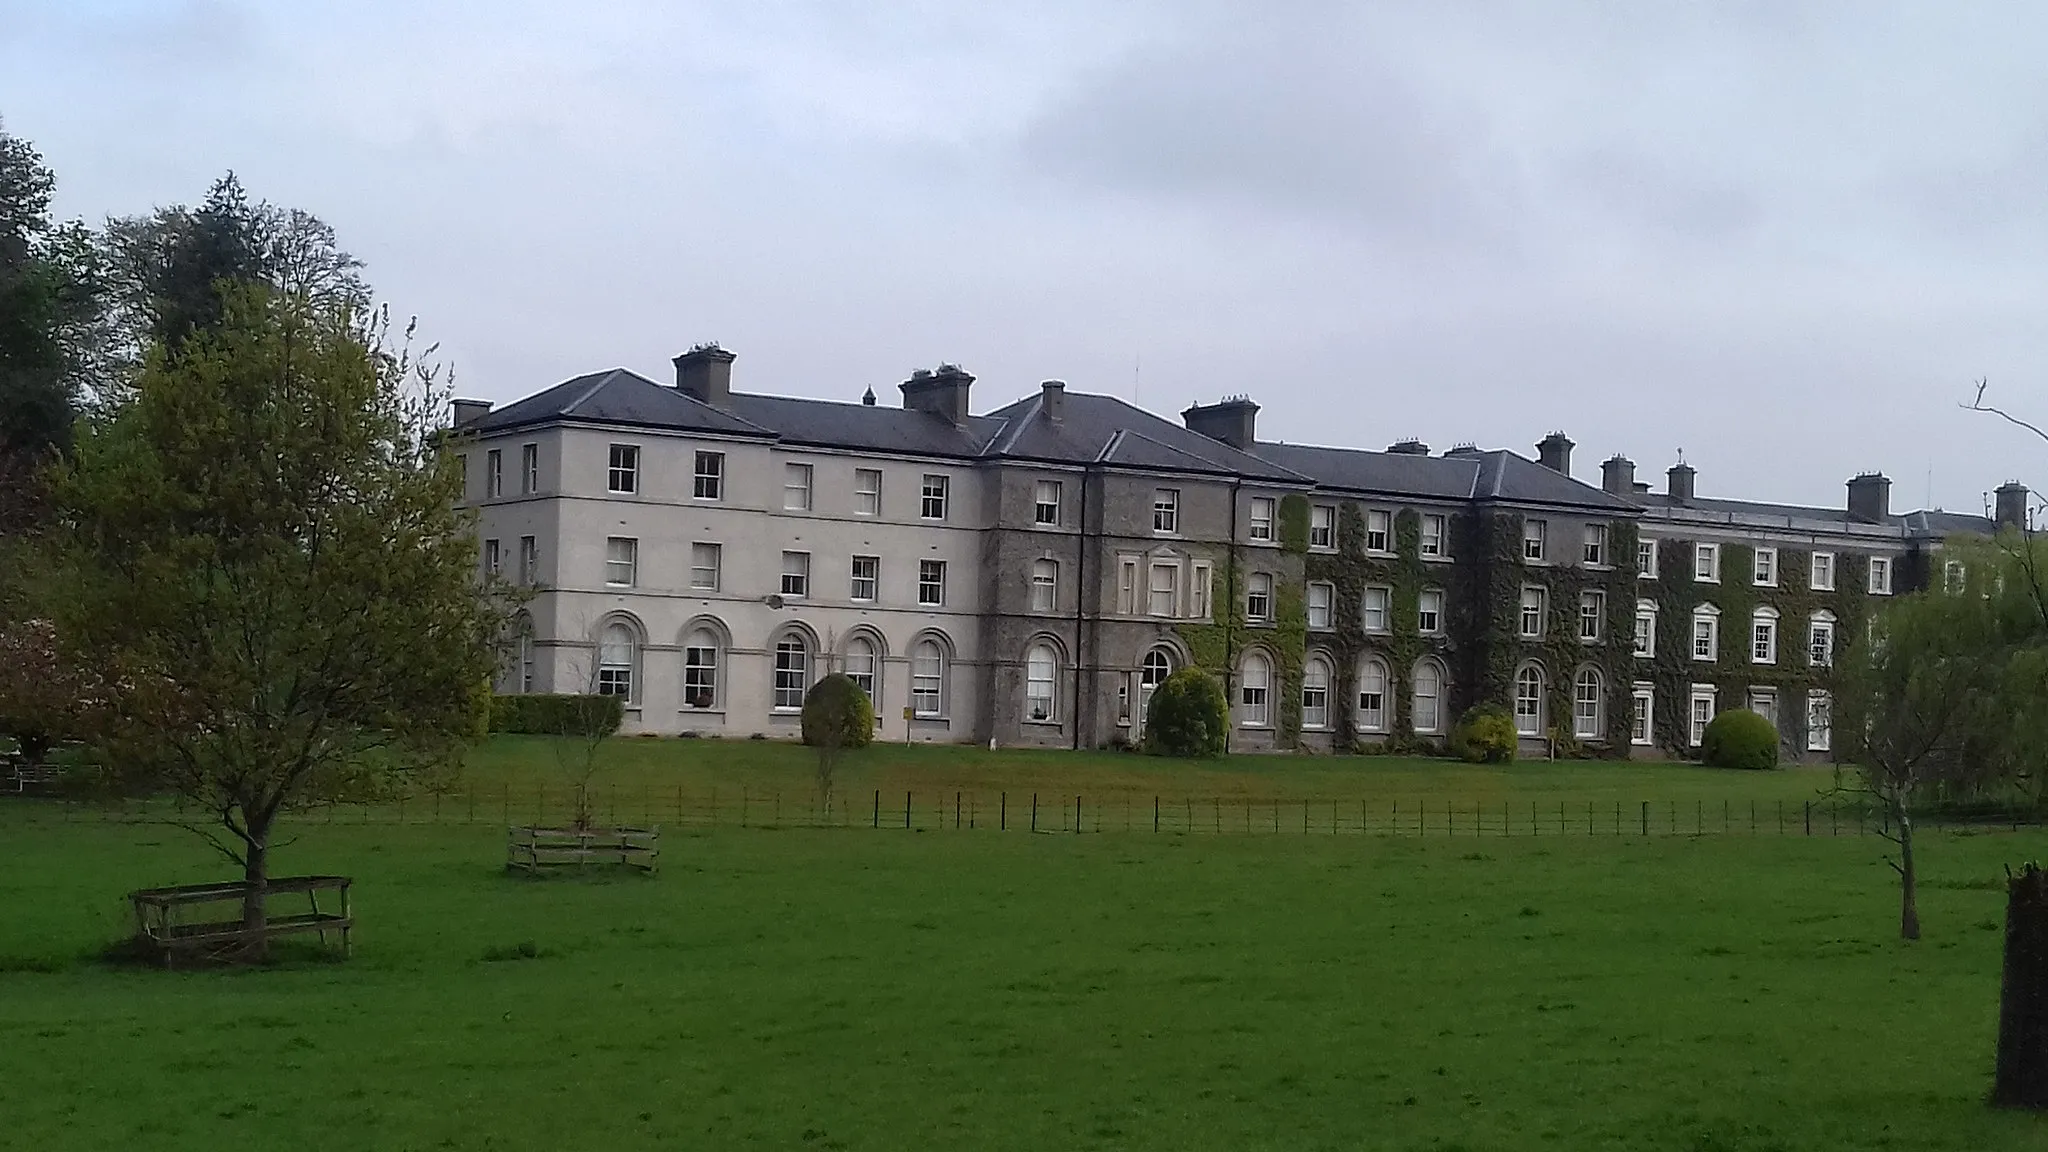 Photo showing: Southern facade of the Vincentian's fee-paying secondary school - Castleknock College. Viewed from the Carpenterstown Road opposite Knockmaroon farm.